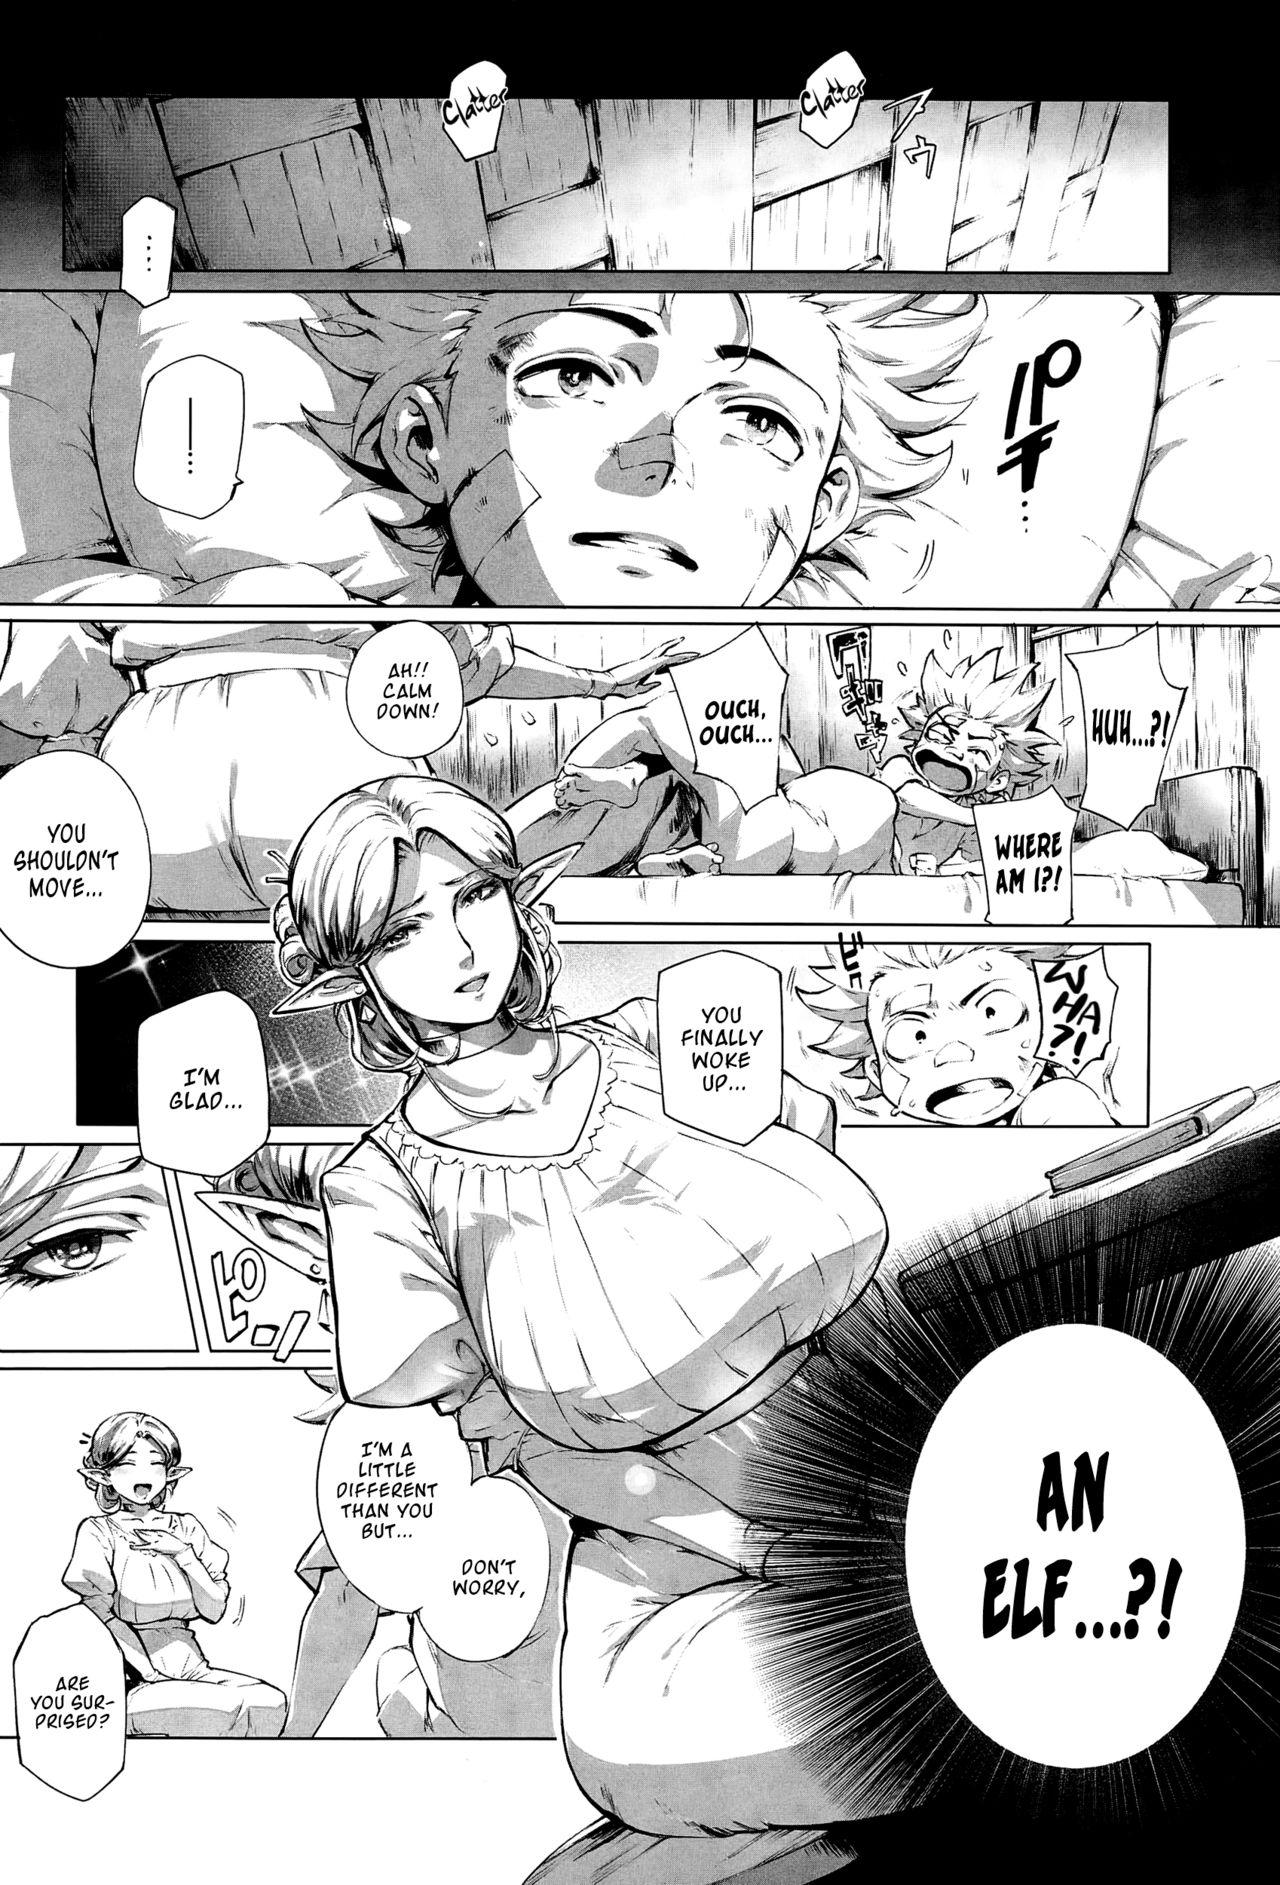 Moneytalks Koko ga Tanetsuke Frontier | This Is The Mating Frontier! Ch. 1-2 Foot - Page 2